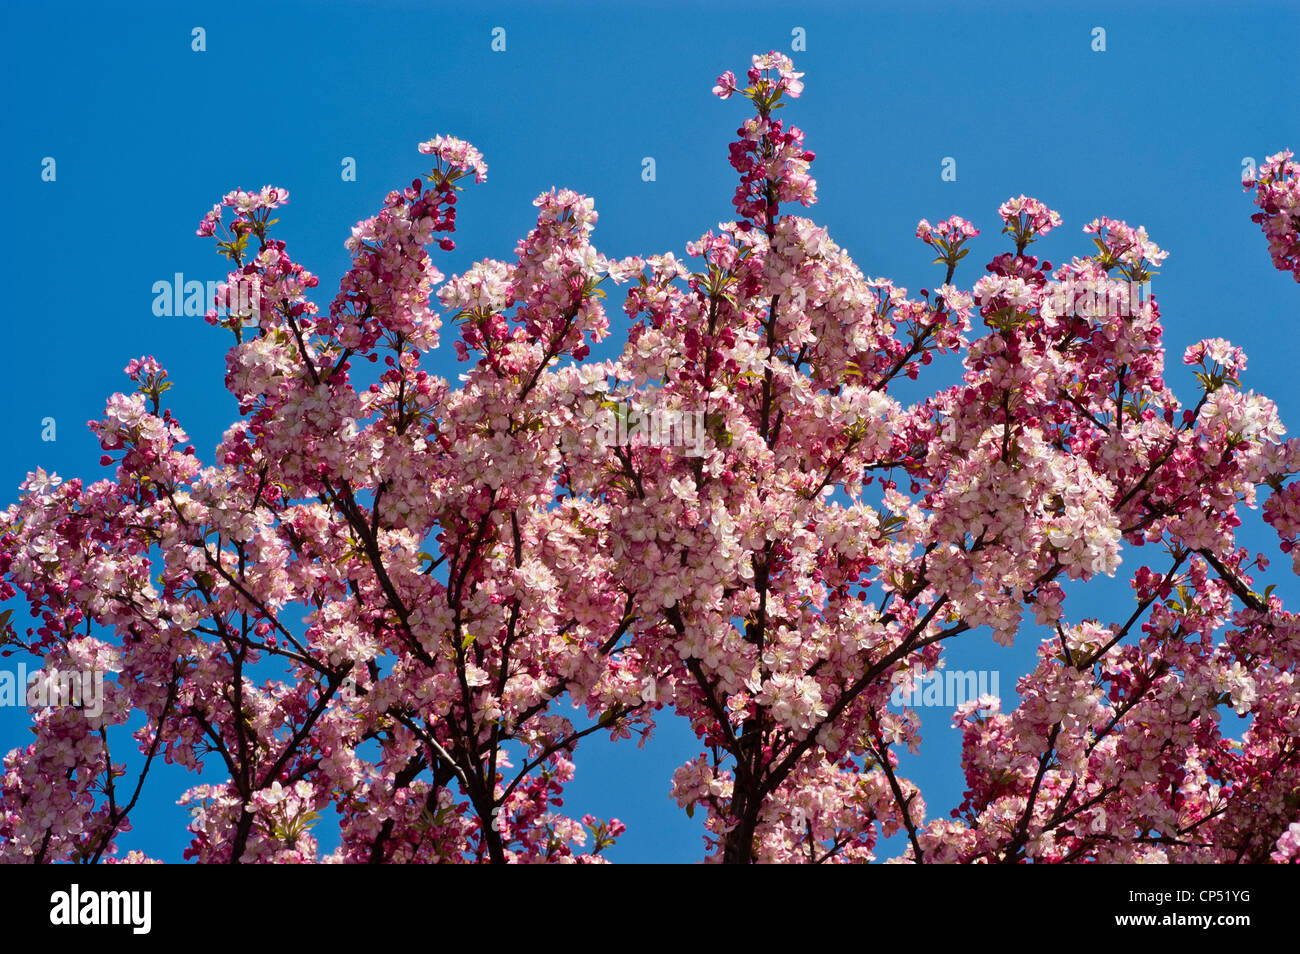 Pink flower buds of apple malus with blue sky background Stock Photo